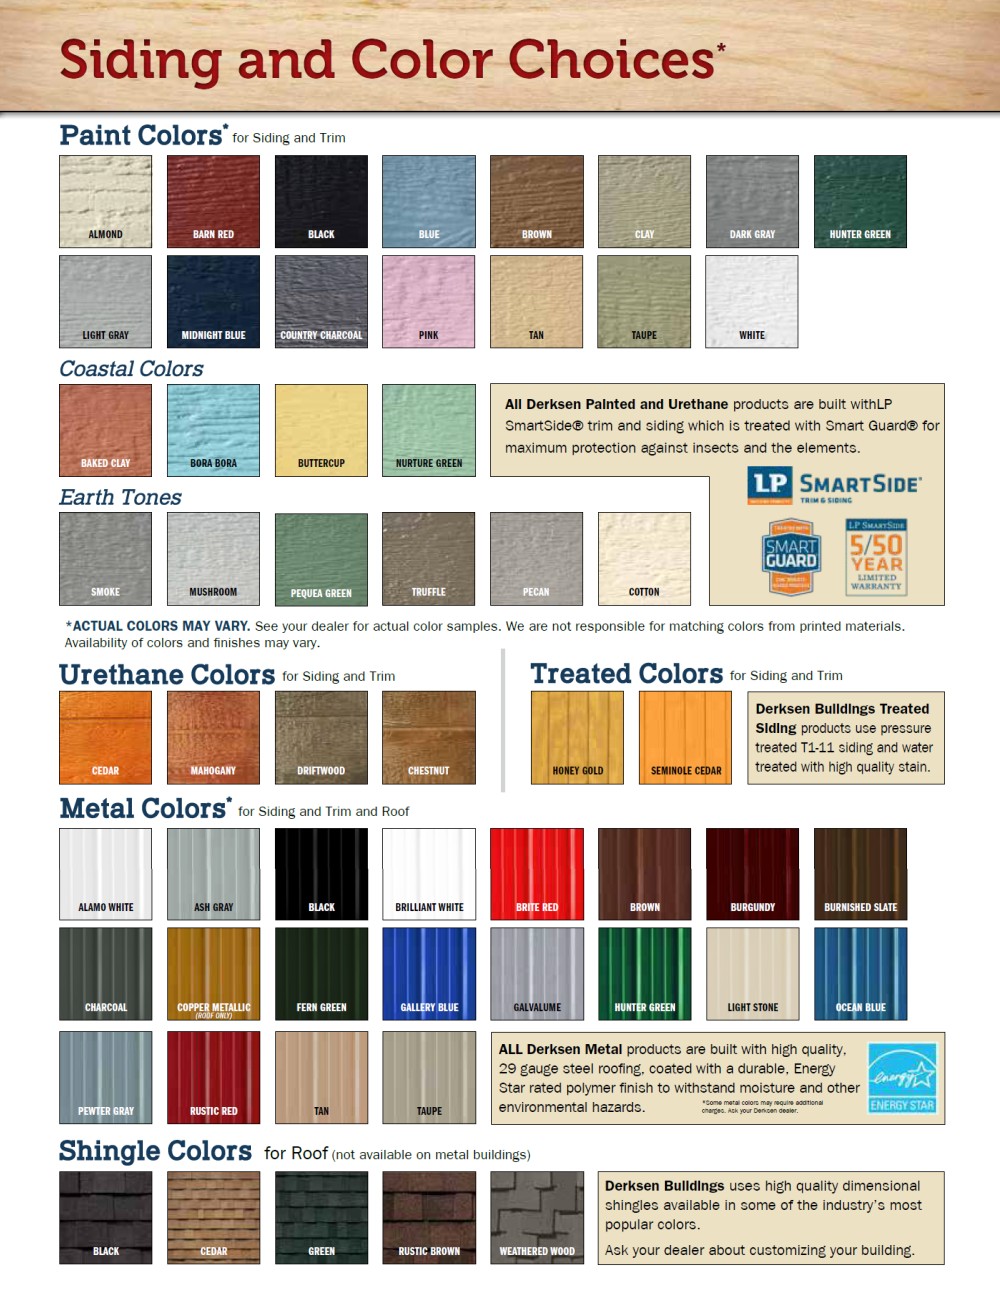 Siding and Color Choices | texasqualitybuildings.com